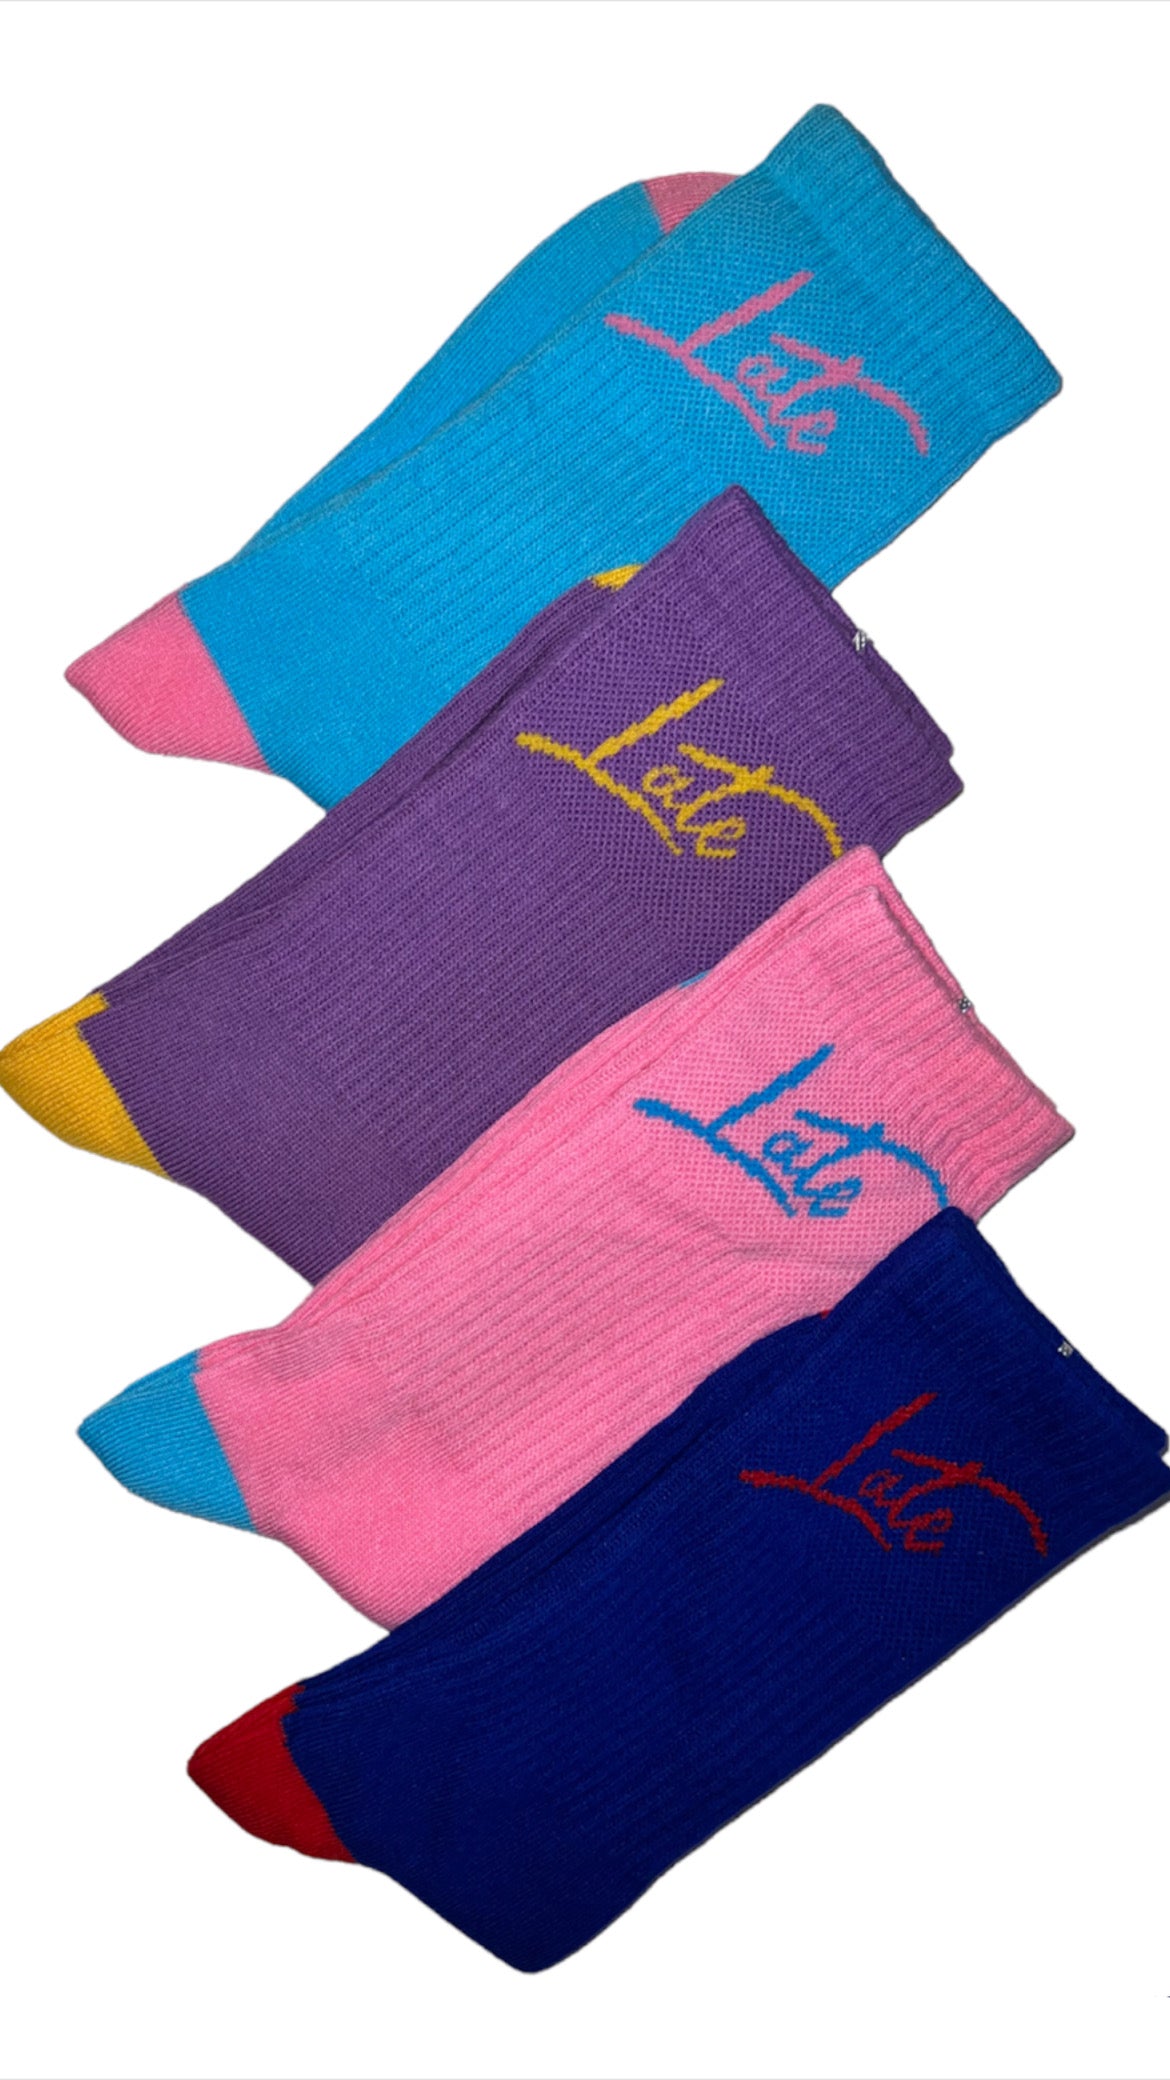 The Lakers “LOGO” Patch Socks